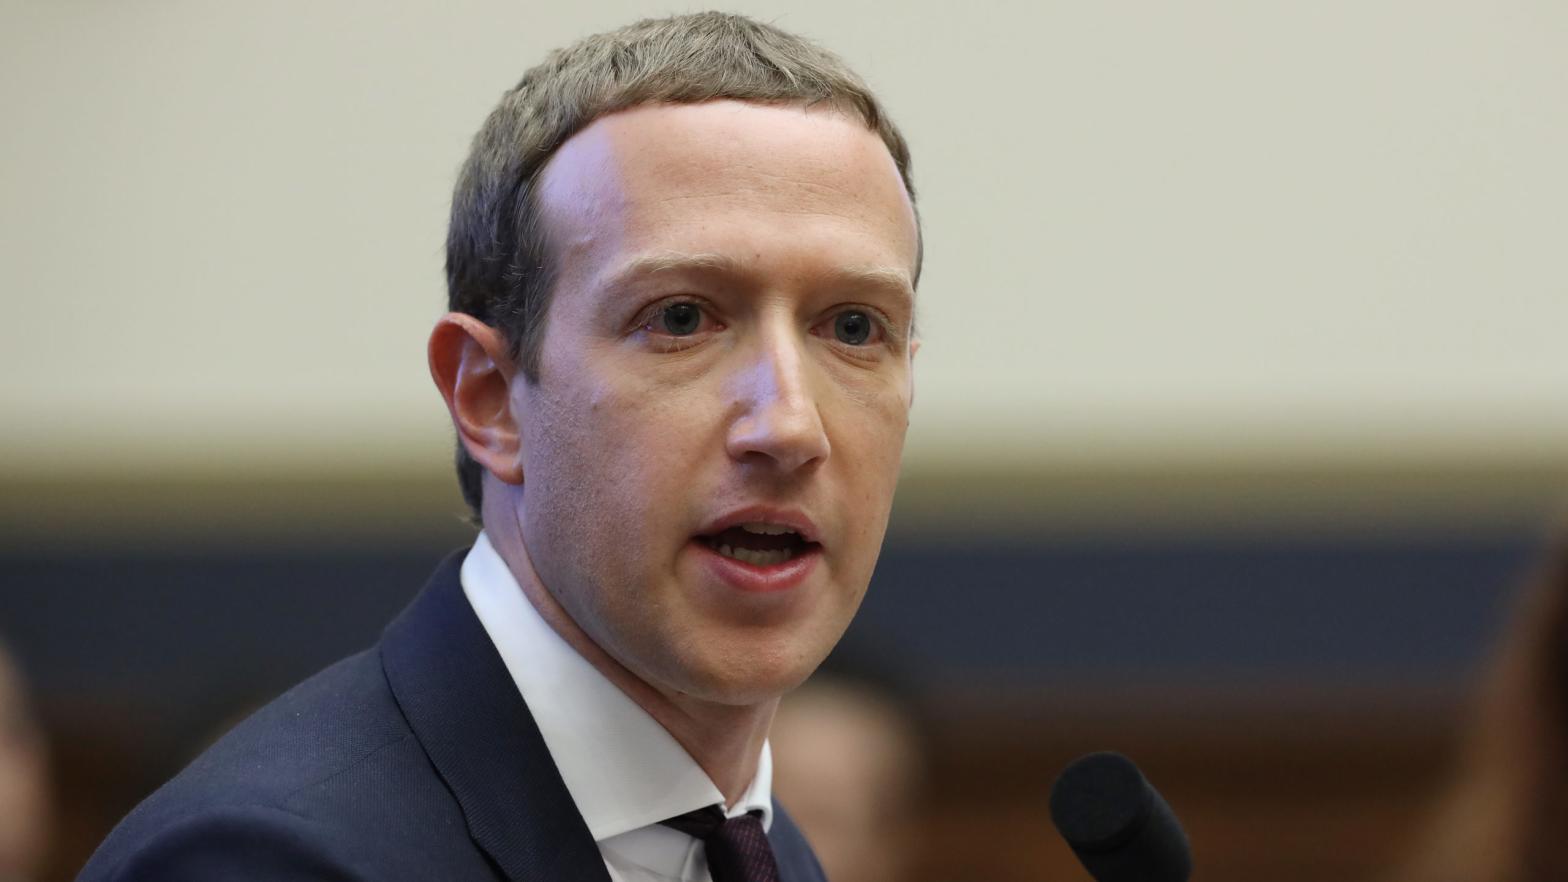 Facebook CEO Mark Zuckerberg testifies before the House Financial Services Committee on October 23, 2019, in Washington, DC about how his company will handle false and misleading information by political leaders during the 2020 campaign. (Photo: Chip Somodevilla, Getty Images)